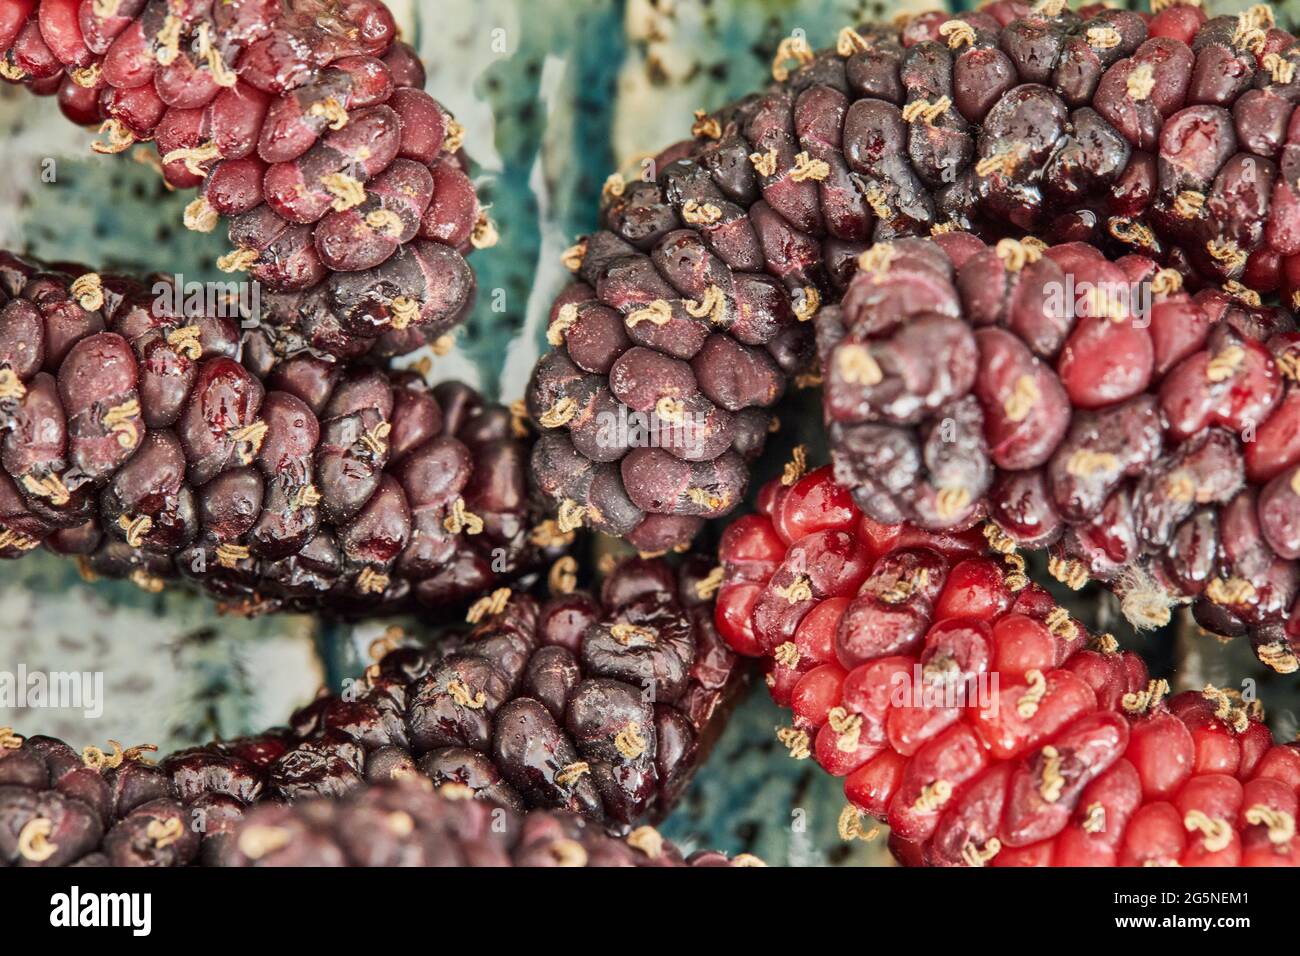 Afghan mulberry black and red lying on plate, close-up. Stock Photo